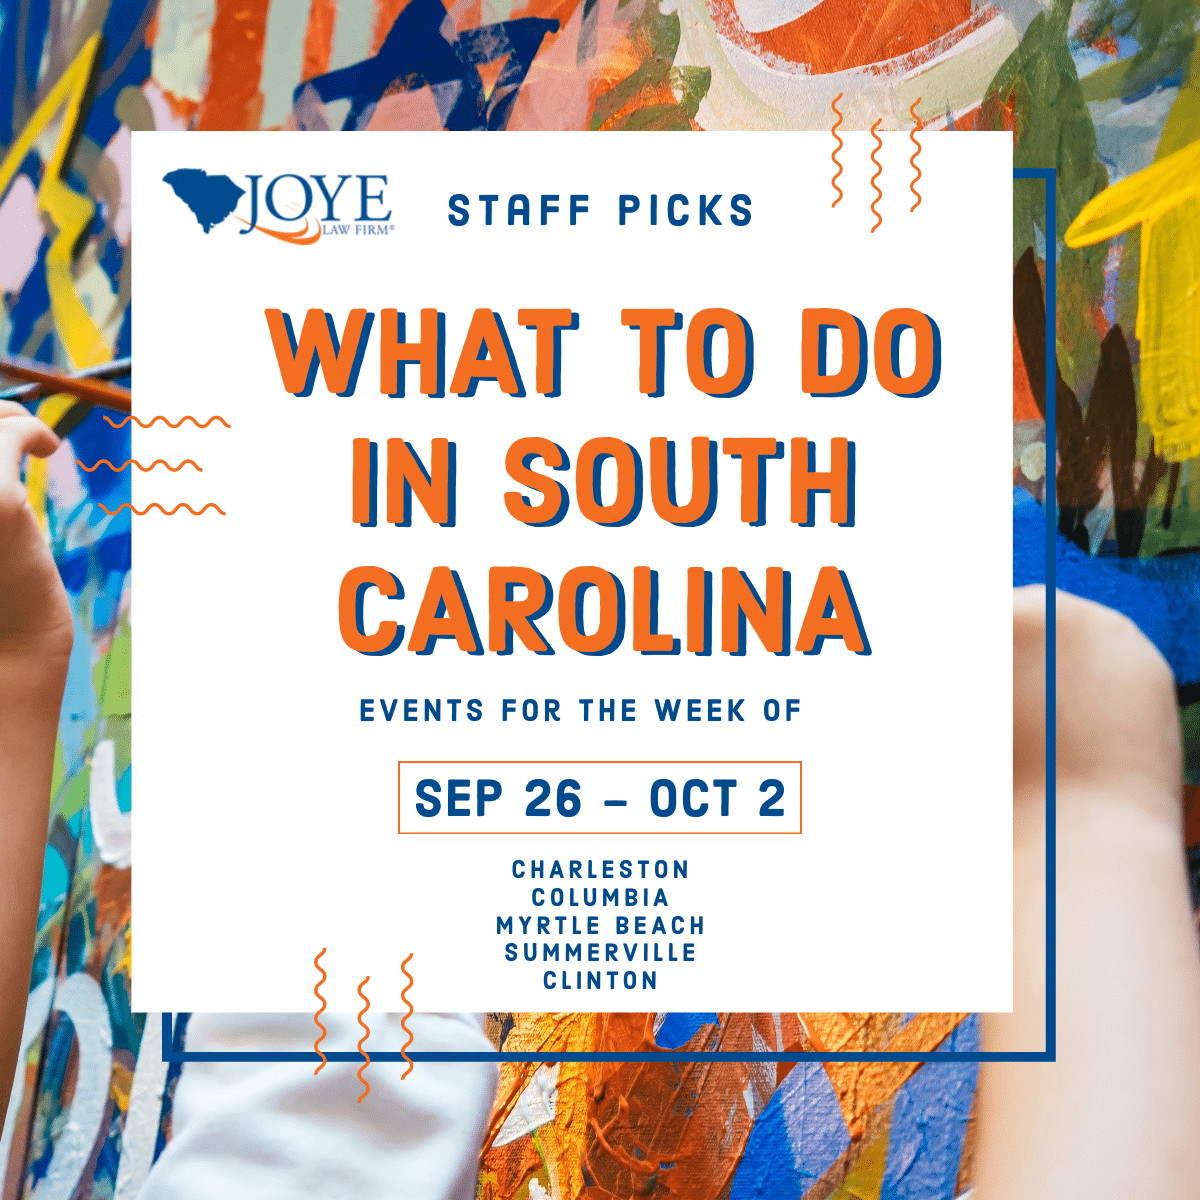 What to do in South Carolina events for the week of Sep 26-Oct 2 for Charleston, Columbia, Myrtle Beach, Summerville and upstate